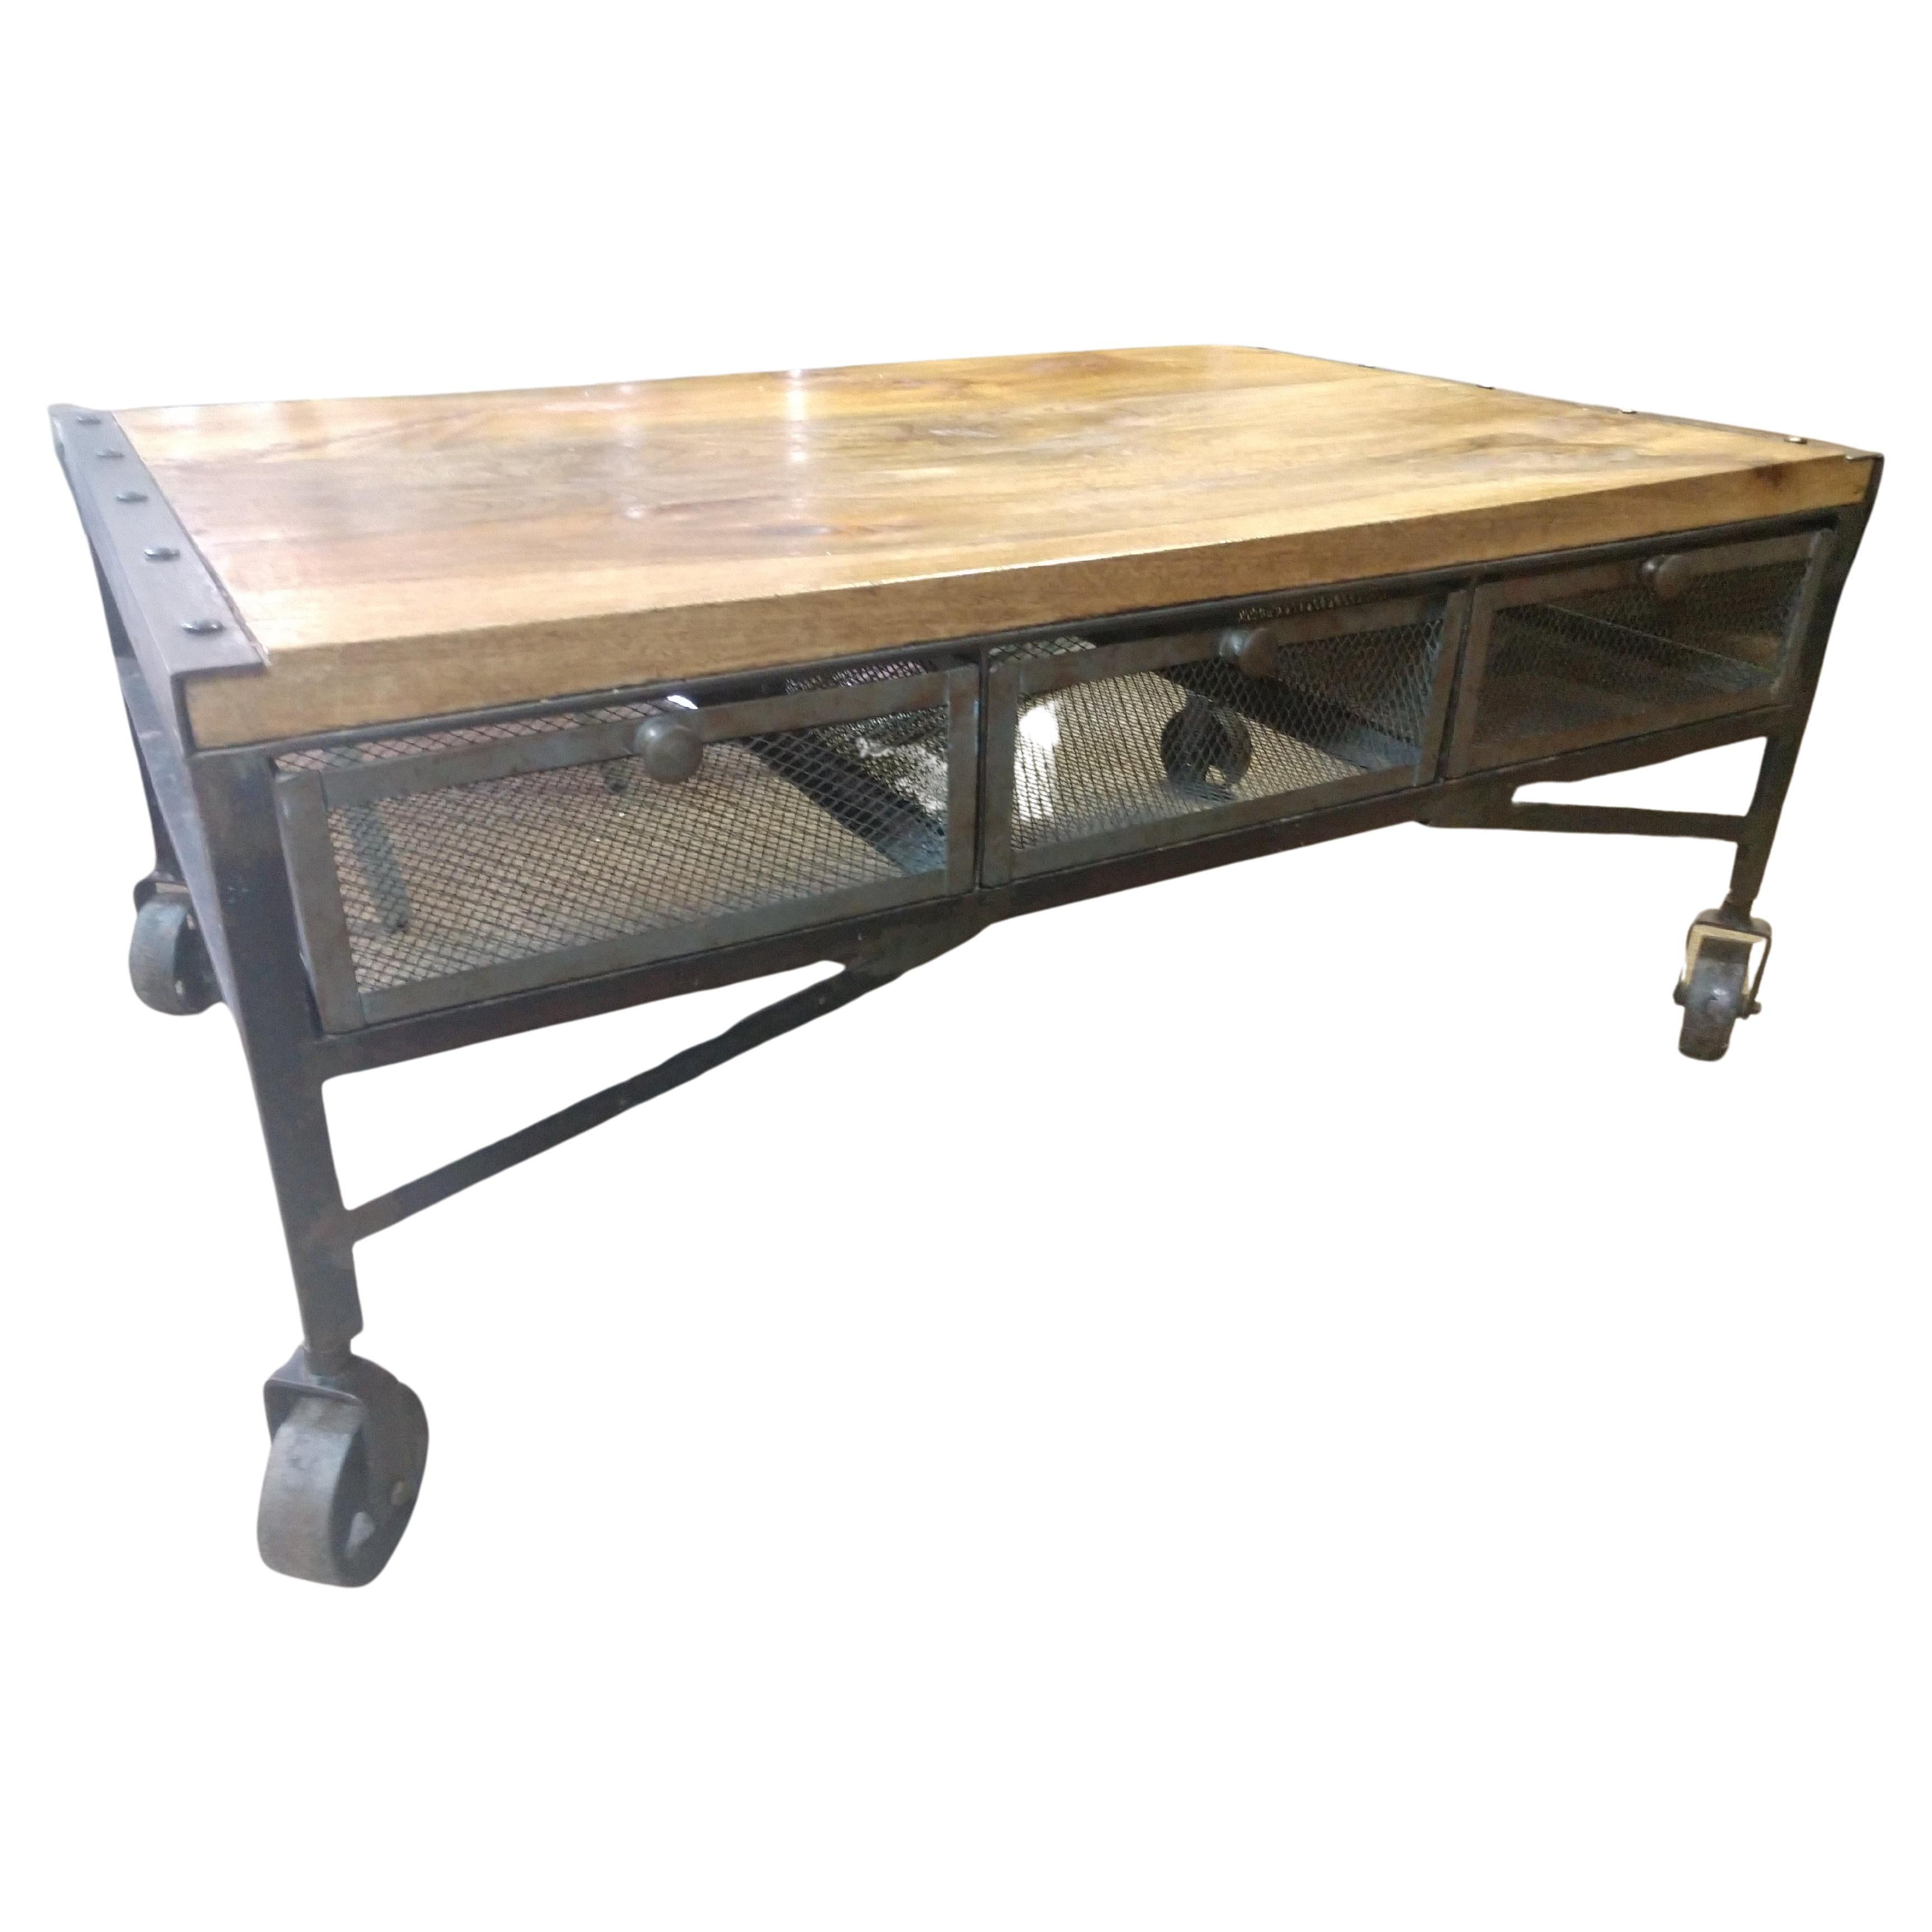 American Industrial Style Loading Dock Cart Cocktail Table Six Wire Basket Drawers For Sale